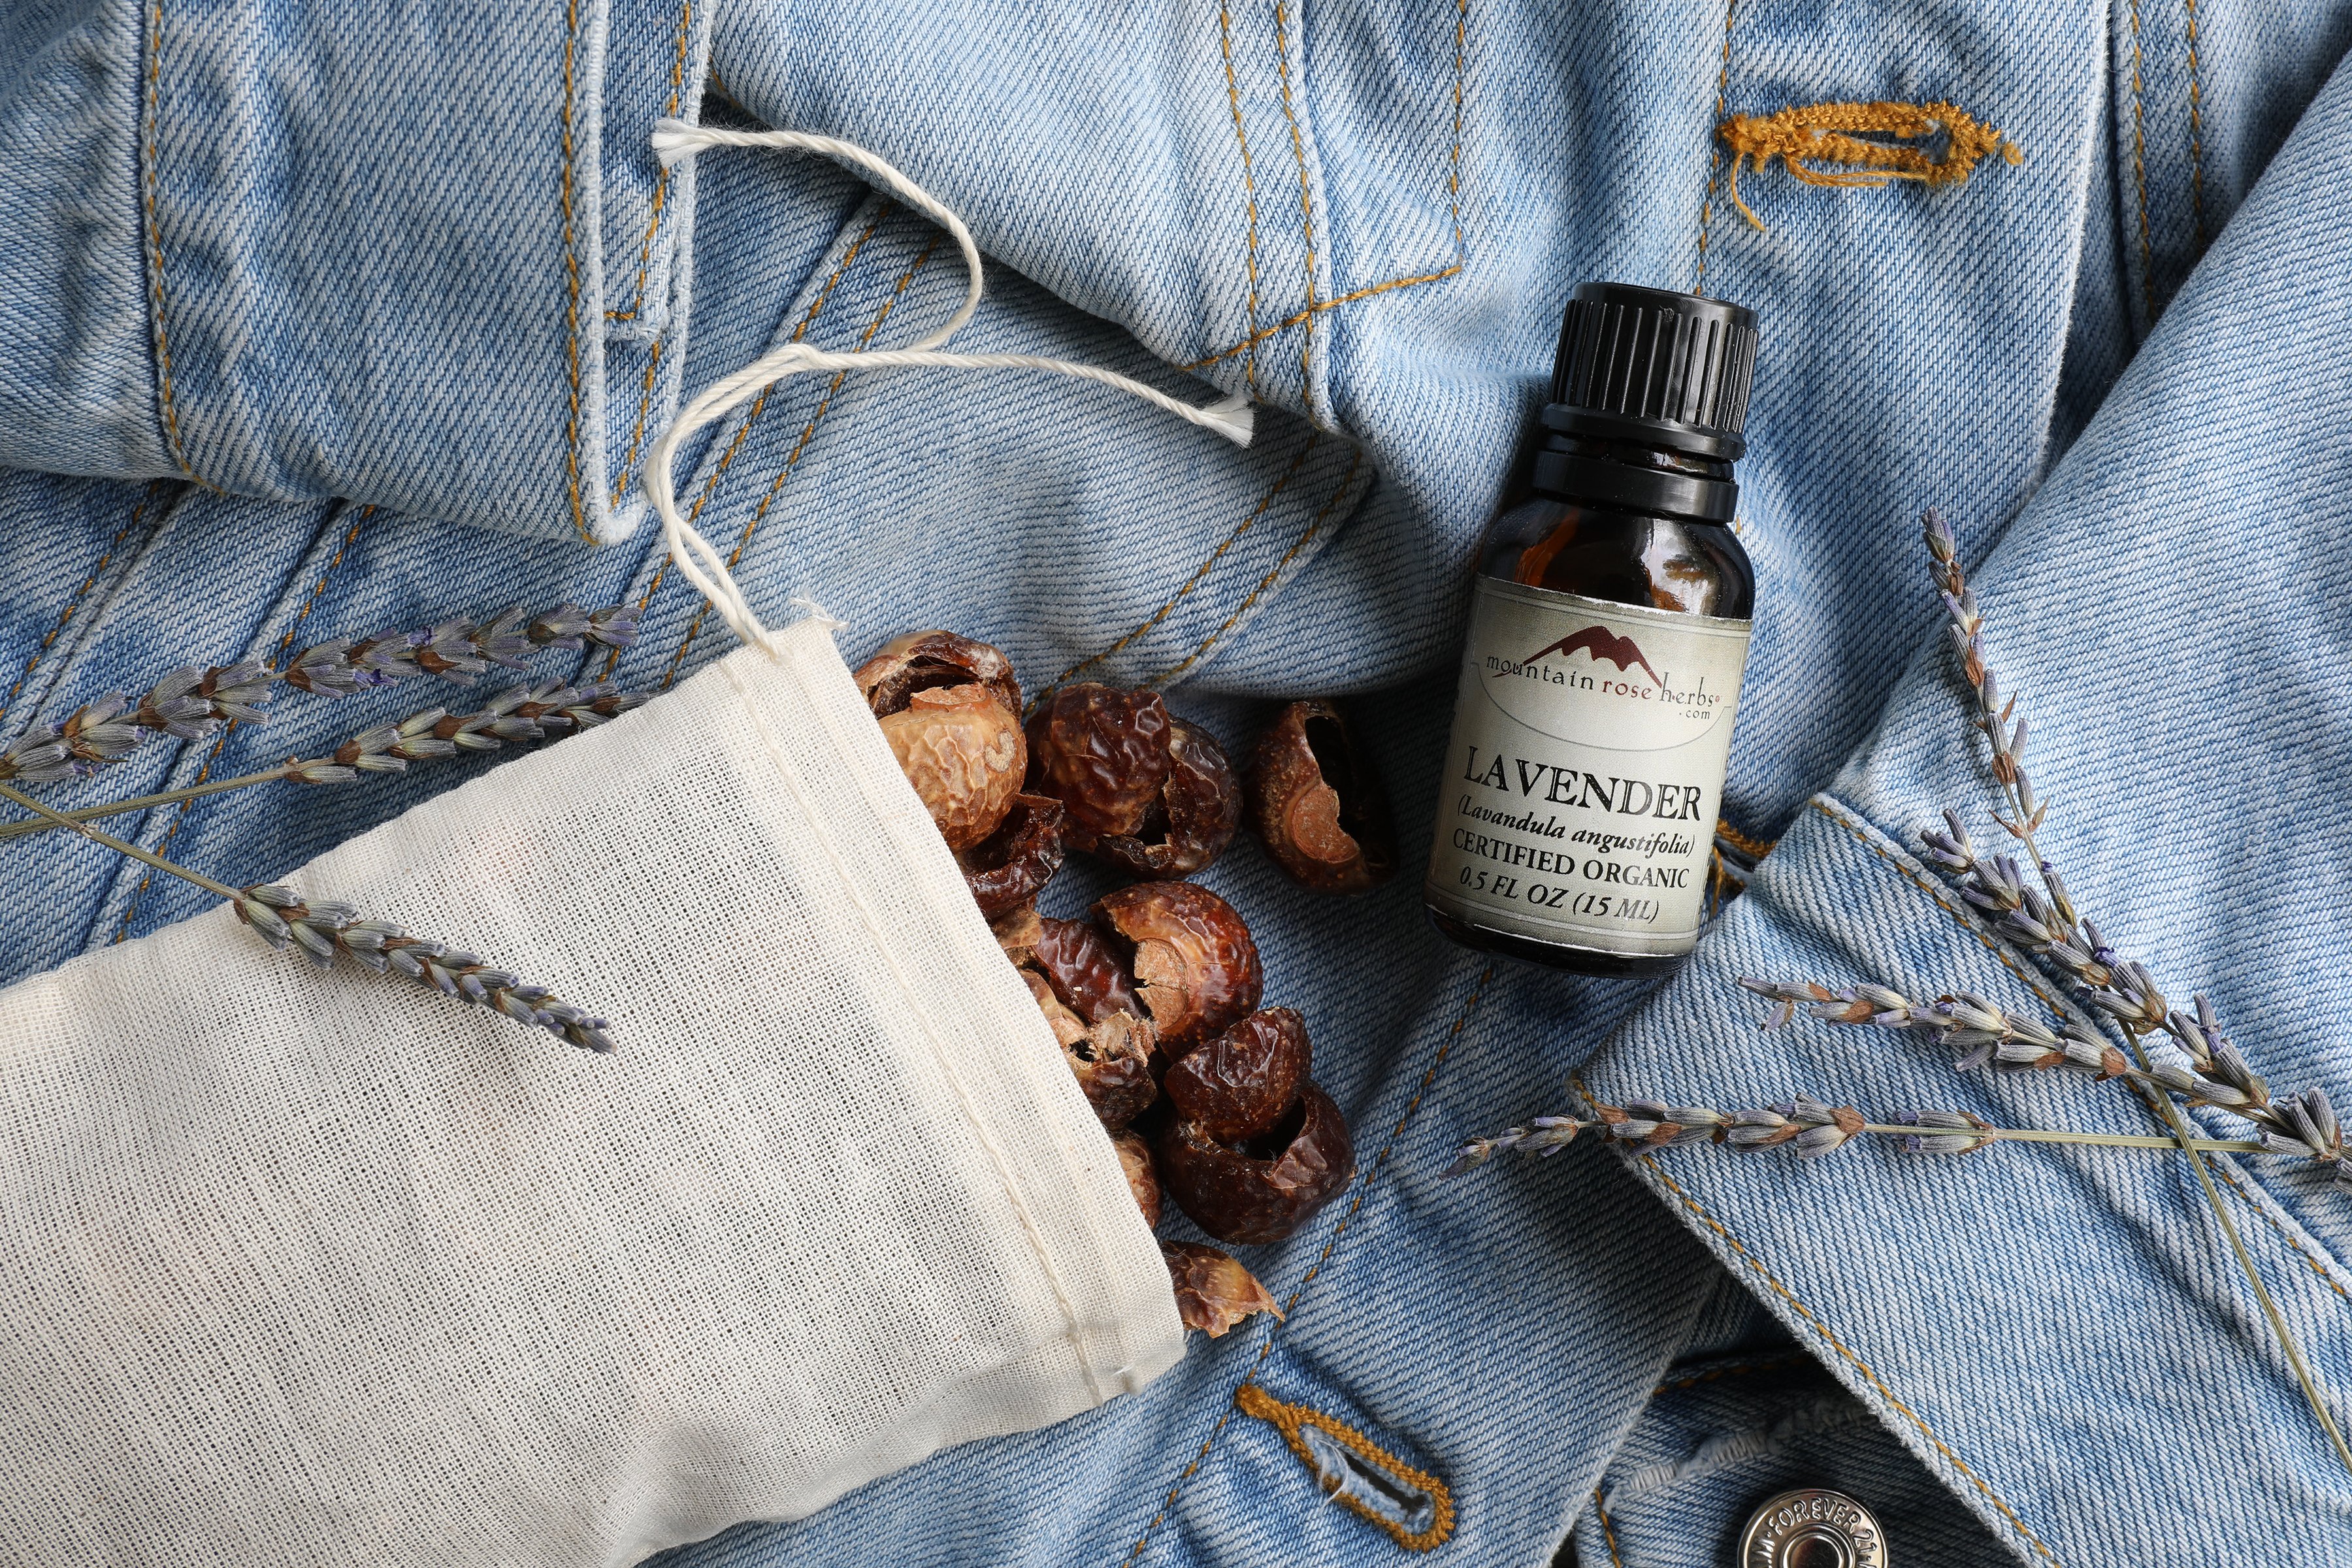 Bag of soap nuts spilling out of cotton bag with bottle of essential oil sitting on denim fabric. 